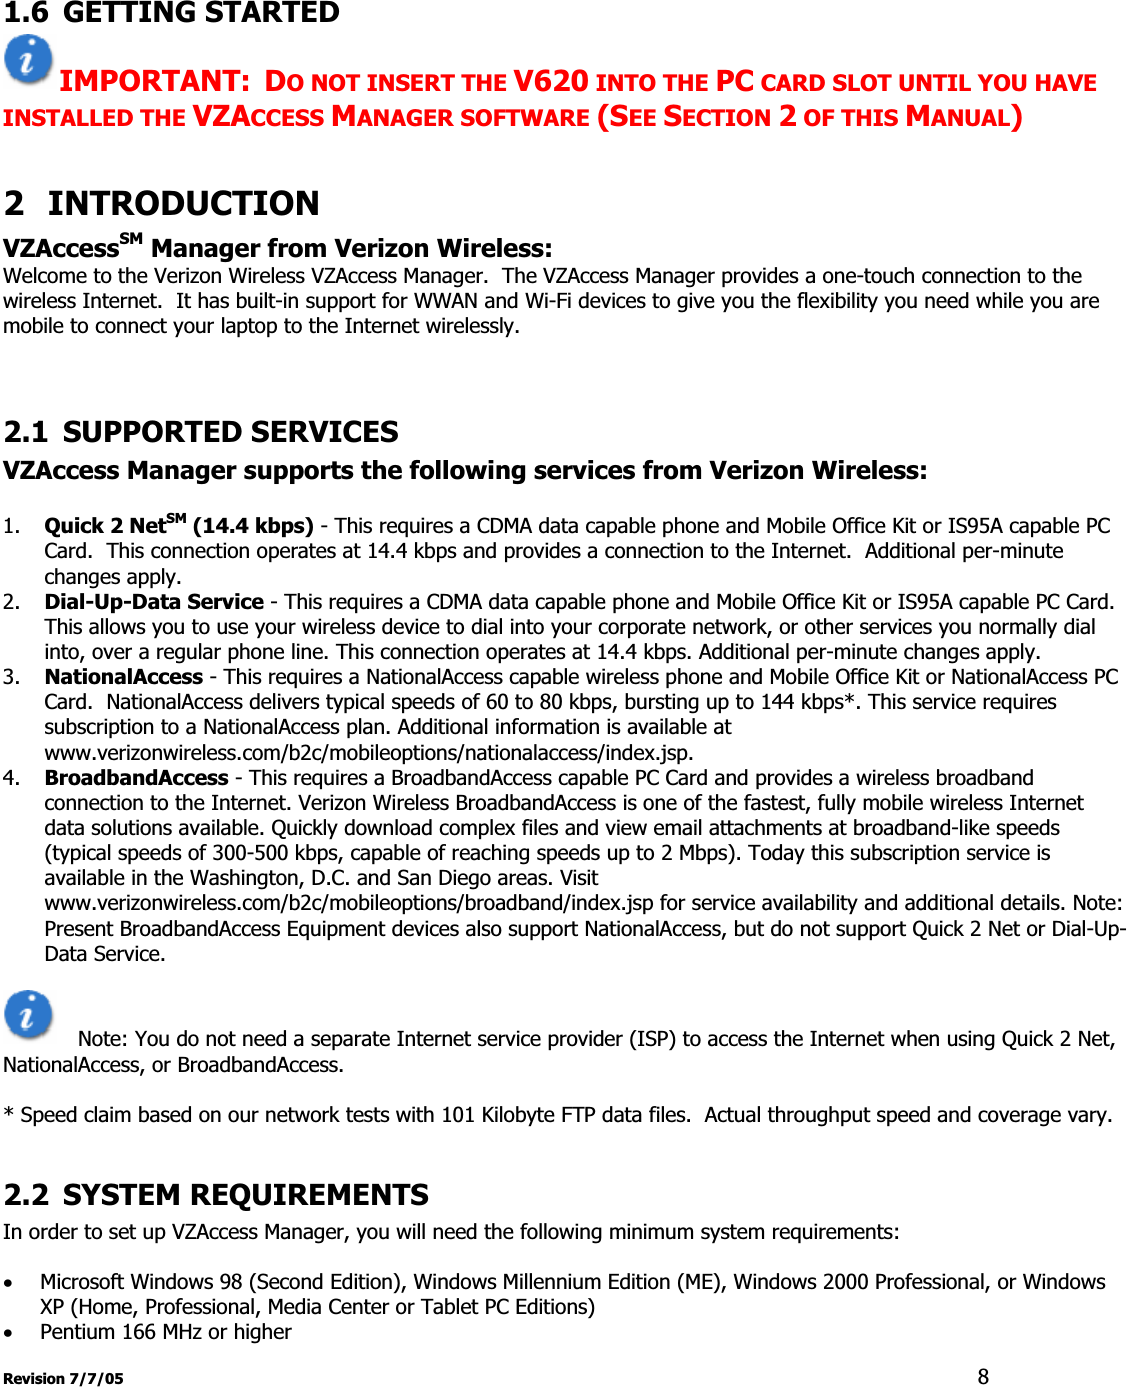 Revision 7/7/05  81.6 GETTING STARTED IMPORTANT: DO NOT INSERT THE V620 INTO THE PC CARD SLOT UNTIL YOU HAVE INSTALLED THE VZACCESS MANAGER SOFTWARE (SEE SECTION 2 OF THIS MANUAL)2 INTRODUCTIONVZAccessSM Manager from Verizon Wireless:Welcome to the Verizon Wireless VZAccess Manager.  The VZAccess Manager provides a one-touch connection to the wireless Internet.  It has built-in support for WWAN and Wi-Fi devices to give you the flexibility you need while you are mobile to connect your laptop to the Internet wirelessly. 2.1 SUPPORTED SERVICES VZAccess Manager supports the following services from Verizon Wireless:1. Quick 2 NetSM (14.4 kbps) - This requires a CDMA data capable phone and Mobile Office Kit or IS95A capable PC Card.  This connection operates at 14.4 kbps and provides a connection to the Internet.  Additional per-minute changes apply. 2. Dial-Up-Data Service - This requires a CDMA data capable phone and Mobile Office Kit or IS95A capable PC Card. This allows you to use your wireless device to dial into your corporate network, or other services you normally dial into, over a regular phone line. This connection operates at 14.4 kbps. Additional per-minute changes apply. 3. NationalAccess - This requires a NationalAccess capable wireless phone and Mobile Office Kit or NationalAccess PC Card.  NationalAccess delivers typical speeds of 60 to 80 kbps, bursting up to 144 kbps*. This service requires subscription to a NationalAccess plan. Additional information is available at www.verizonwireless.com/b2c/mobileoptions/nationalaccess/index.jsp. 4. BroadbandAccess - This requires a BroadbandAccess capable PC Card and provides a wireless broadband connection to the Internet. Verizon Wireless BroadbandAccess is one of the fastest, fully mobile wireless Internet data solutions available. Quickly download complex files and view email attachments at broadband-like speeds (typical speeds of 300-500 kbps, capable of reaching speeds up to 2 Mbps). Today this subscription service is available in the Washington, D.C. and San Diego areas. Visit www.verizonwireless.com/b2c/mobileoptions/broadband/index.jsp for service availability and additional details. Note: Present BroadbandAccess Equipment devices also support NationalAccess, but do not support Quick 2 Net or Dial-Up-Data Service.  Note: You do not need a separate Internet service provider (ISP) to access the Internet when using Quick 2 Net, NationalAccess, or BroadbandAccess. * Speed claim based on our network tests with 101 Kilobyte FTP data files.  Actual throughput speed and coverage vary. 2.2 SYSTEM REQUIREMENTS In order to set up VZAccess Manager, you will need the following minimum system requirements: xMicrosoft Windows 98 (Second Edition), Windows Millennium Edition (ME), Windows 2000 Professional, or Windows XP (Home, Professional, Media Center or Tablet PC Editions) xPentium 166 MHz or higher 